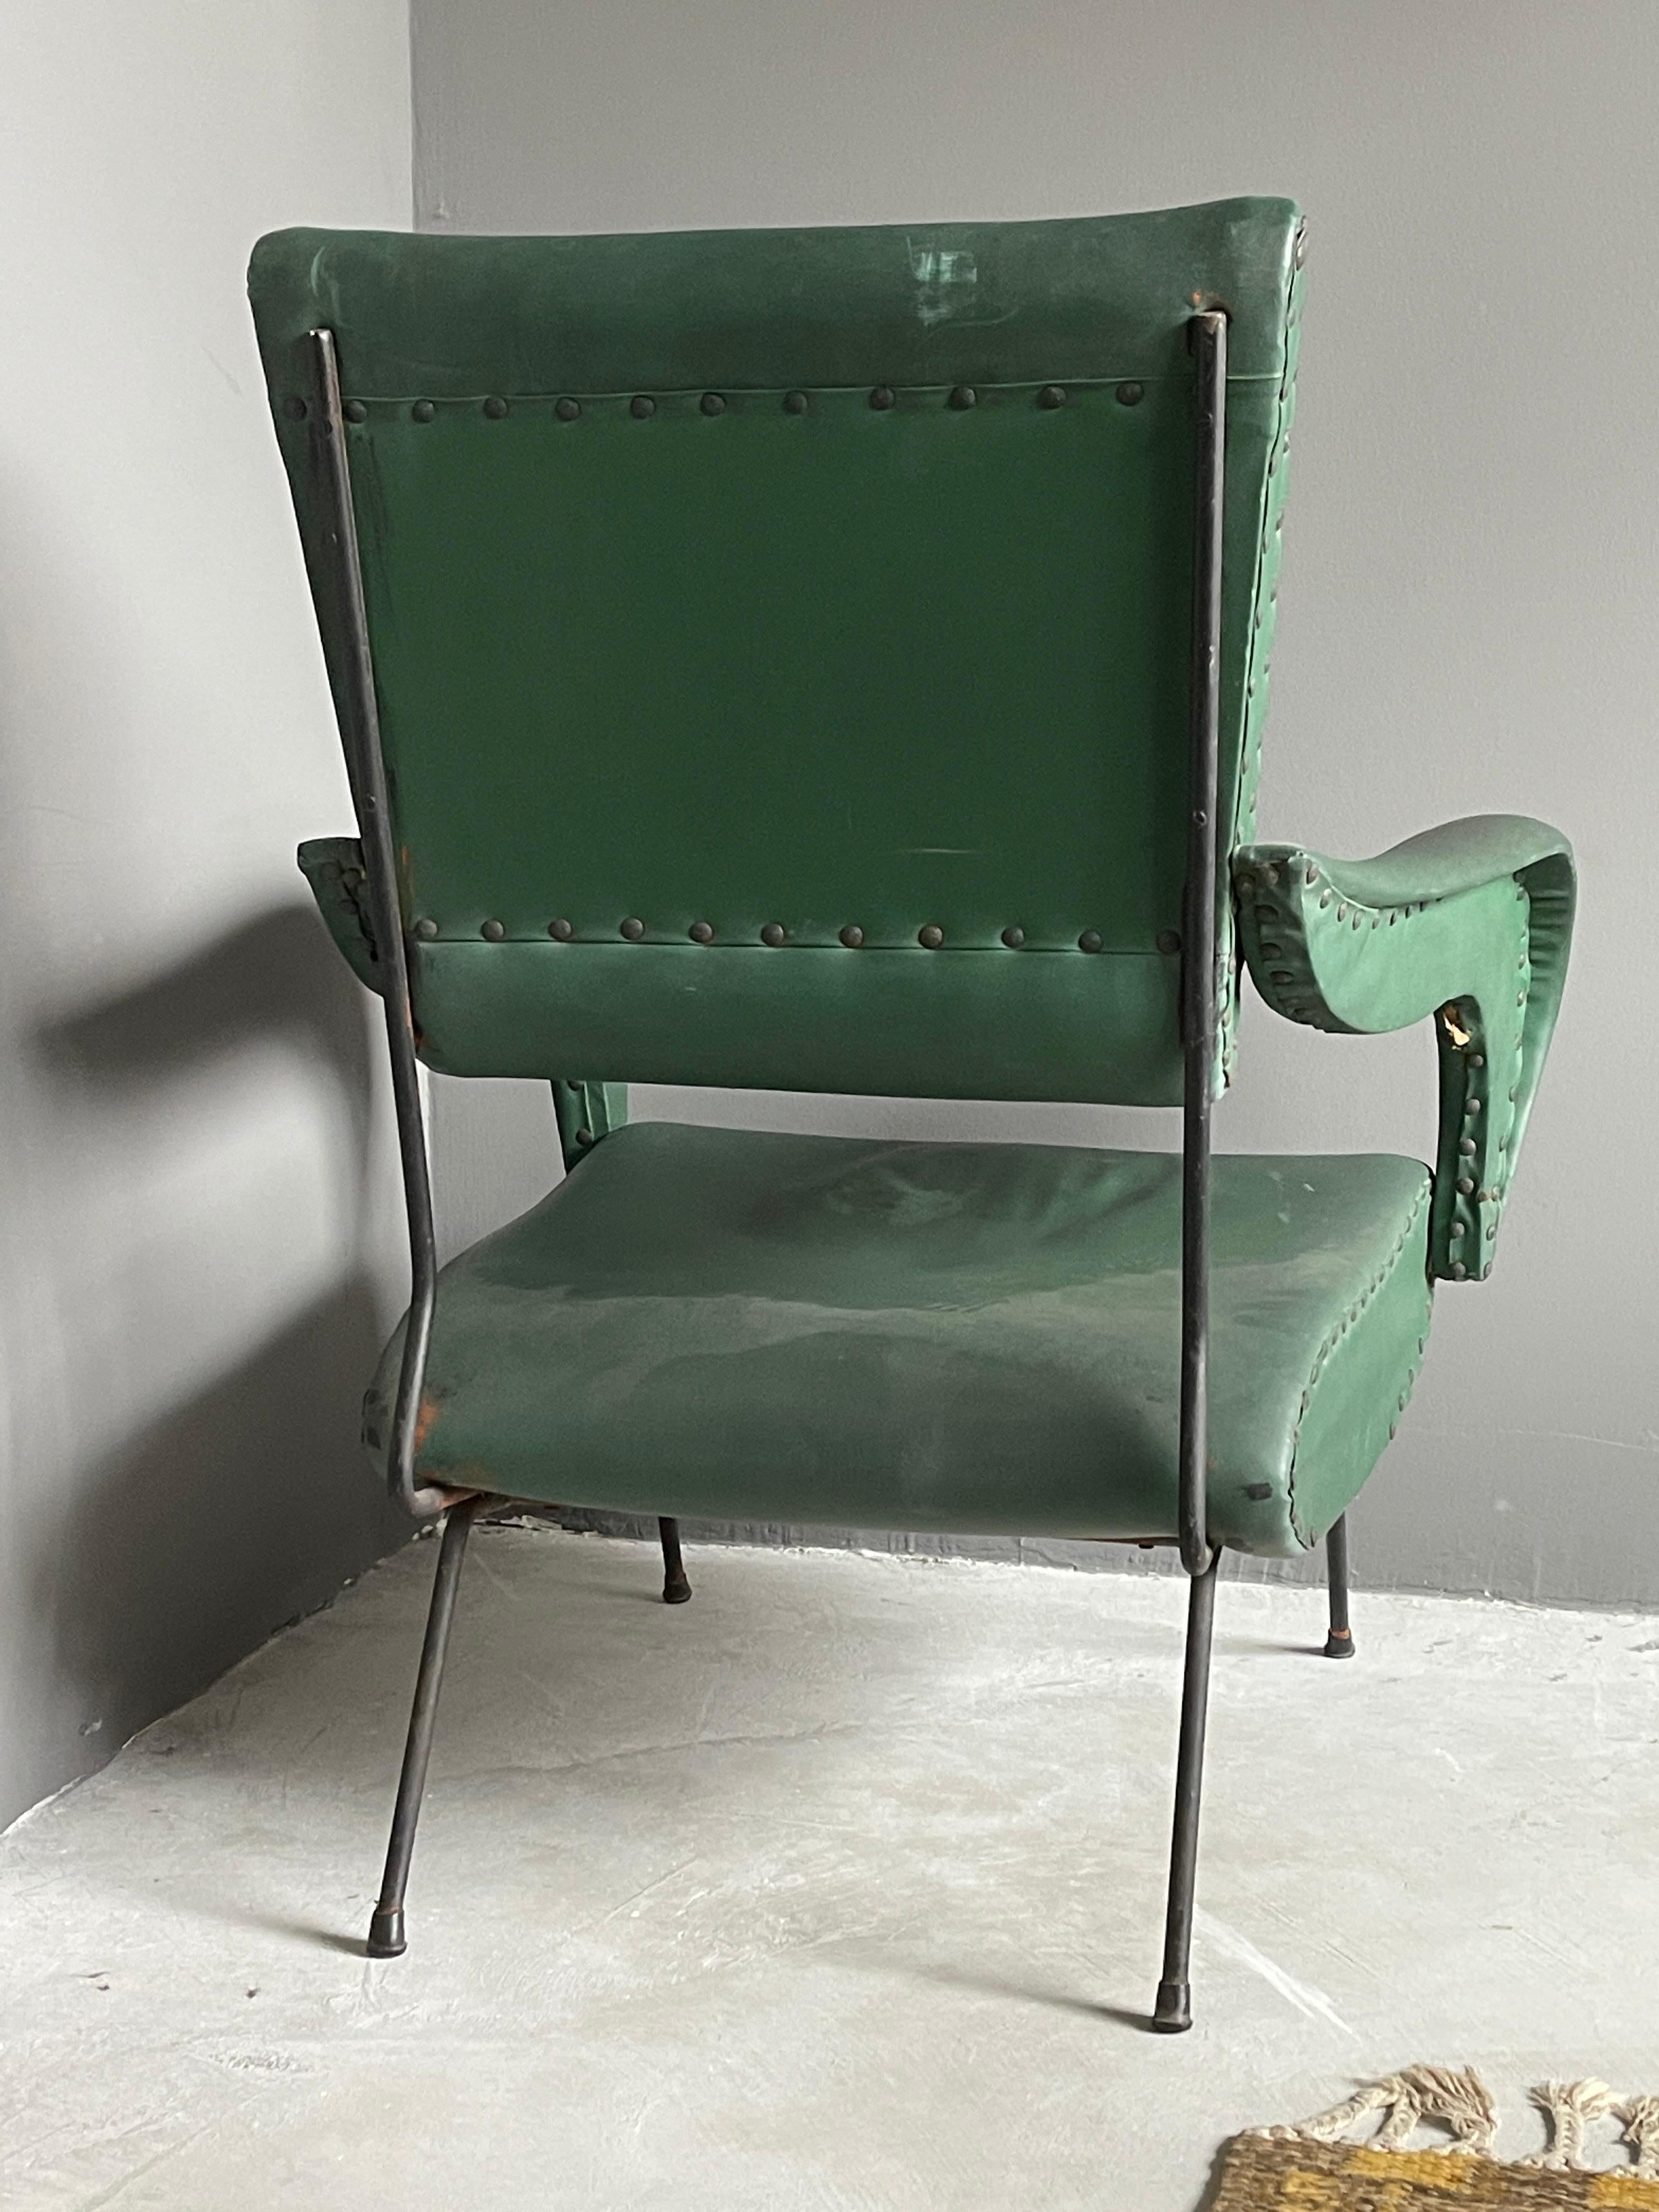 Italian Designer, Lounge Chairs, Lacquered Metal, Green-Dyed Vinyl, Italy, 1950s For Sale 1